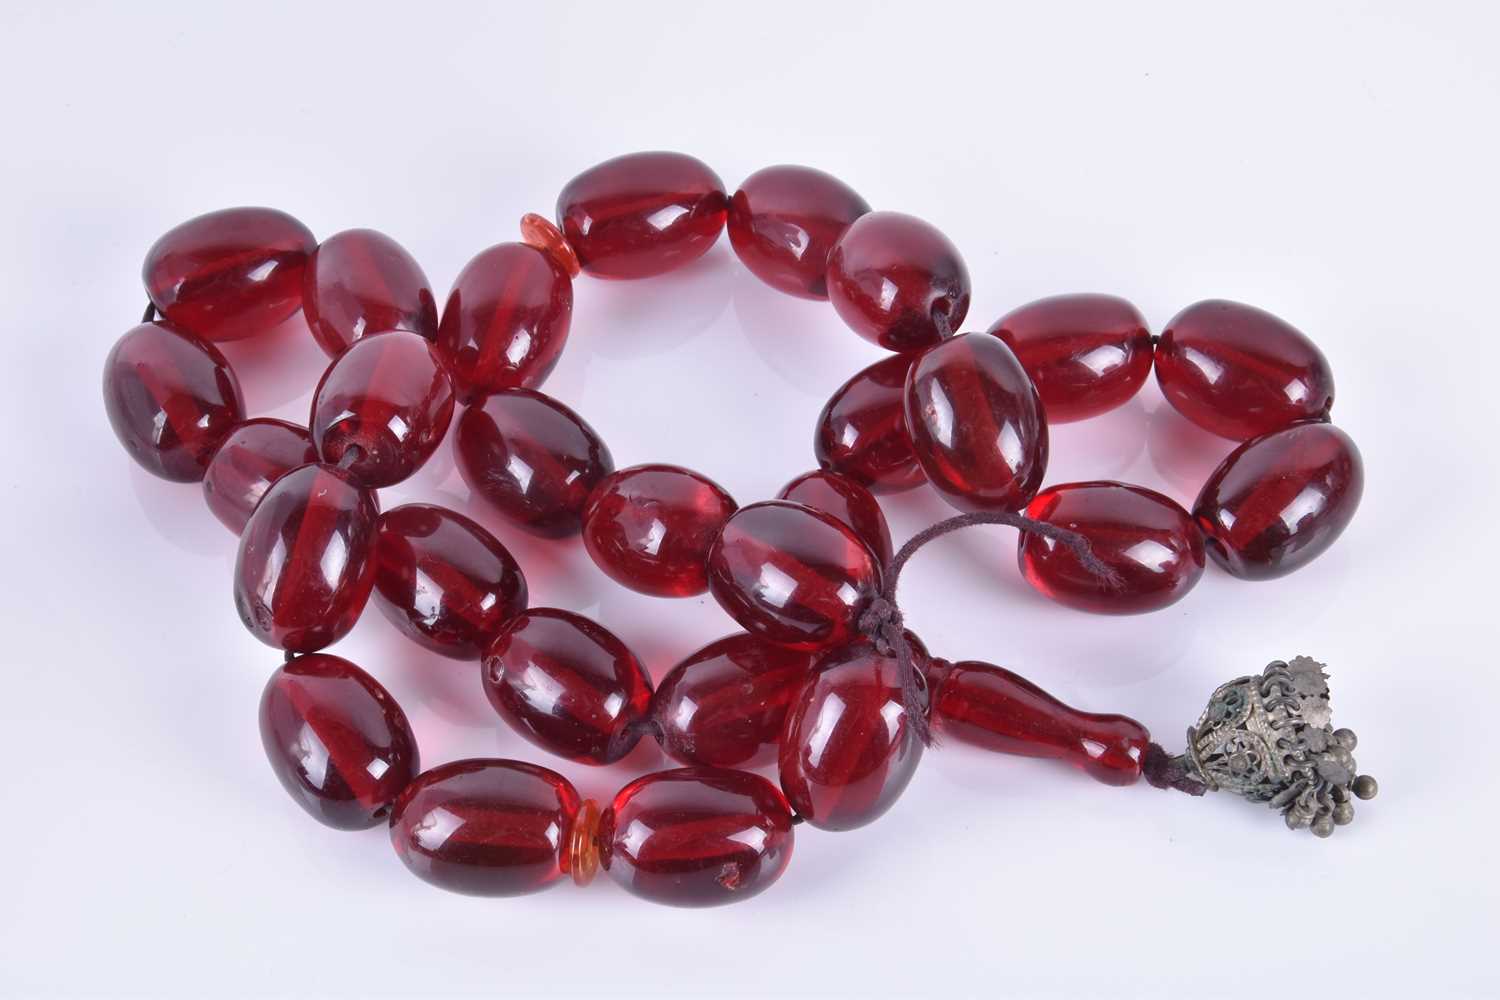 A large amber prayer bead necklacecomprised of cherry amber beads, each bead approximately 4 cm